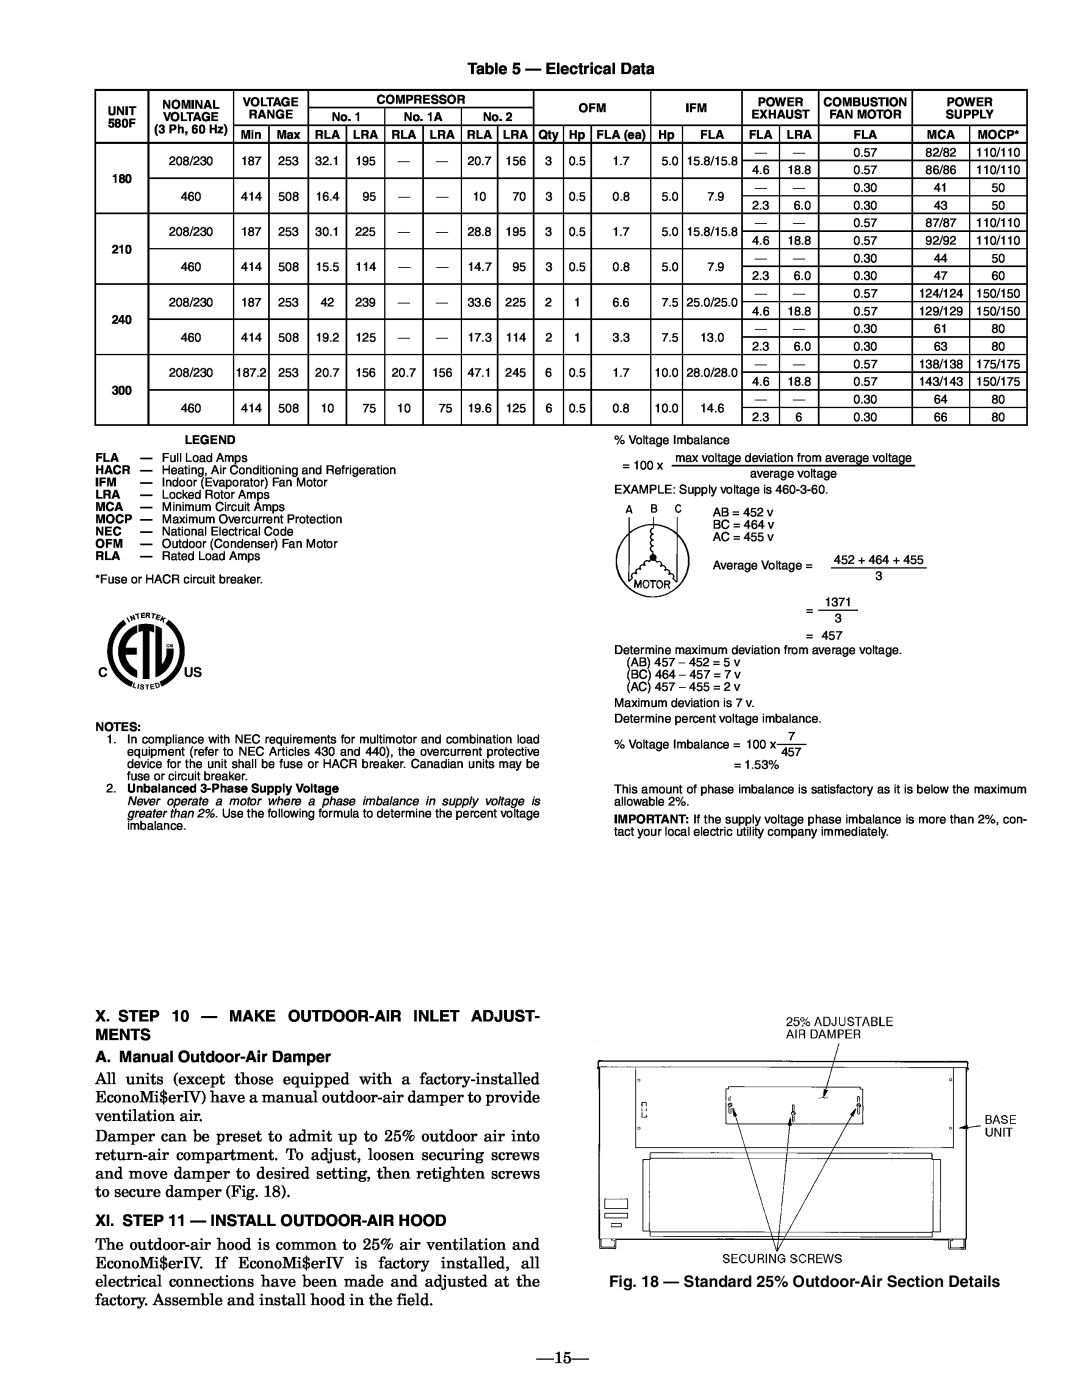 Bryant 580F operation manual Electrical Data, X. - Make Outdoor-Airinlet Adjust Ments, A. Manual Outdoor-AirDamper 